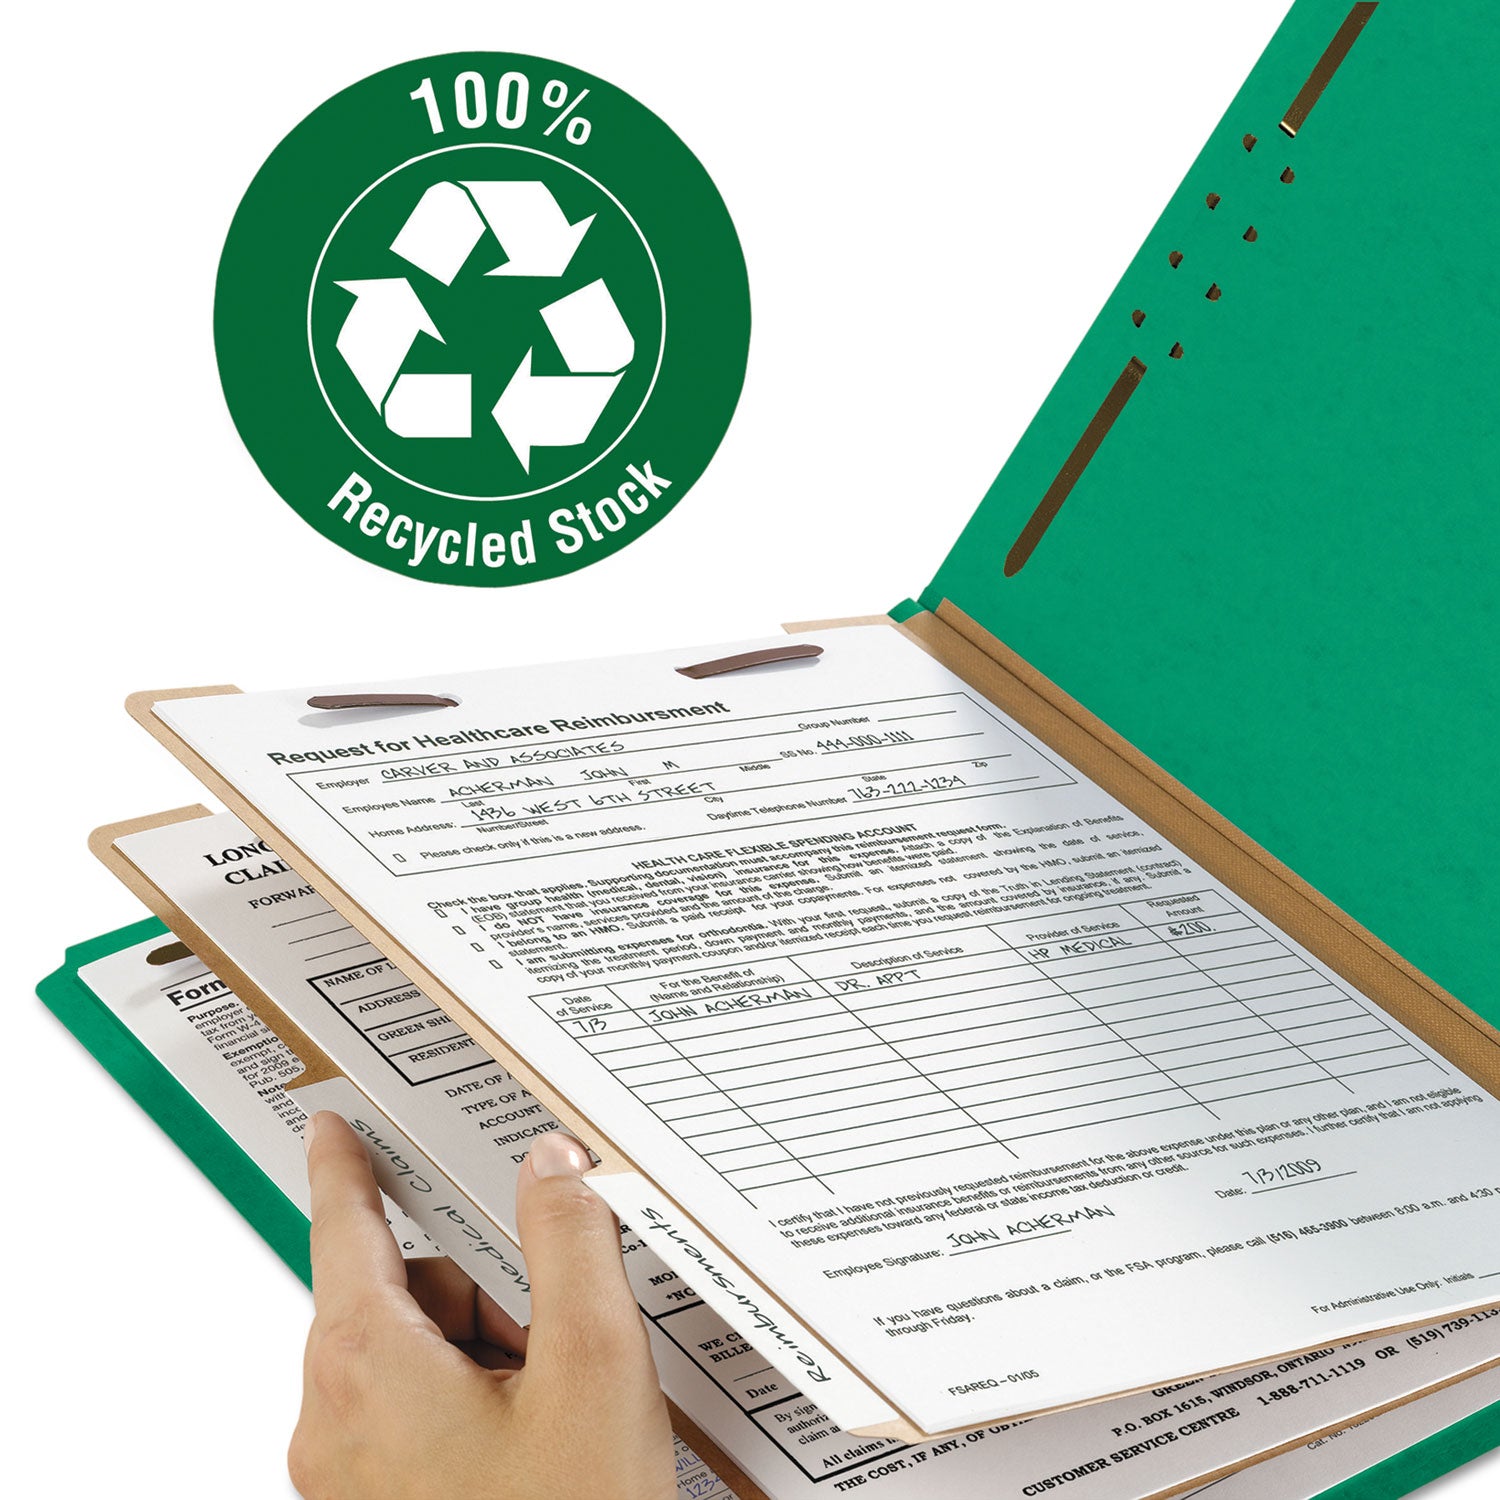 Recycled Pressboard Classification Folders, 2" Expansion, 2 Dividers, 6 Fasteners, Letter Size, Green Exterior, 10/Box - 